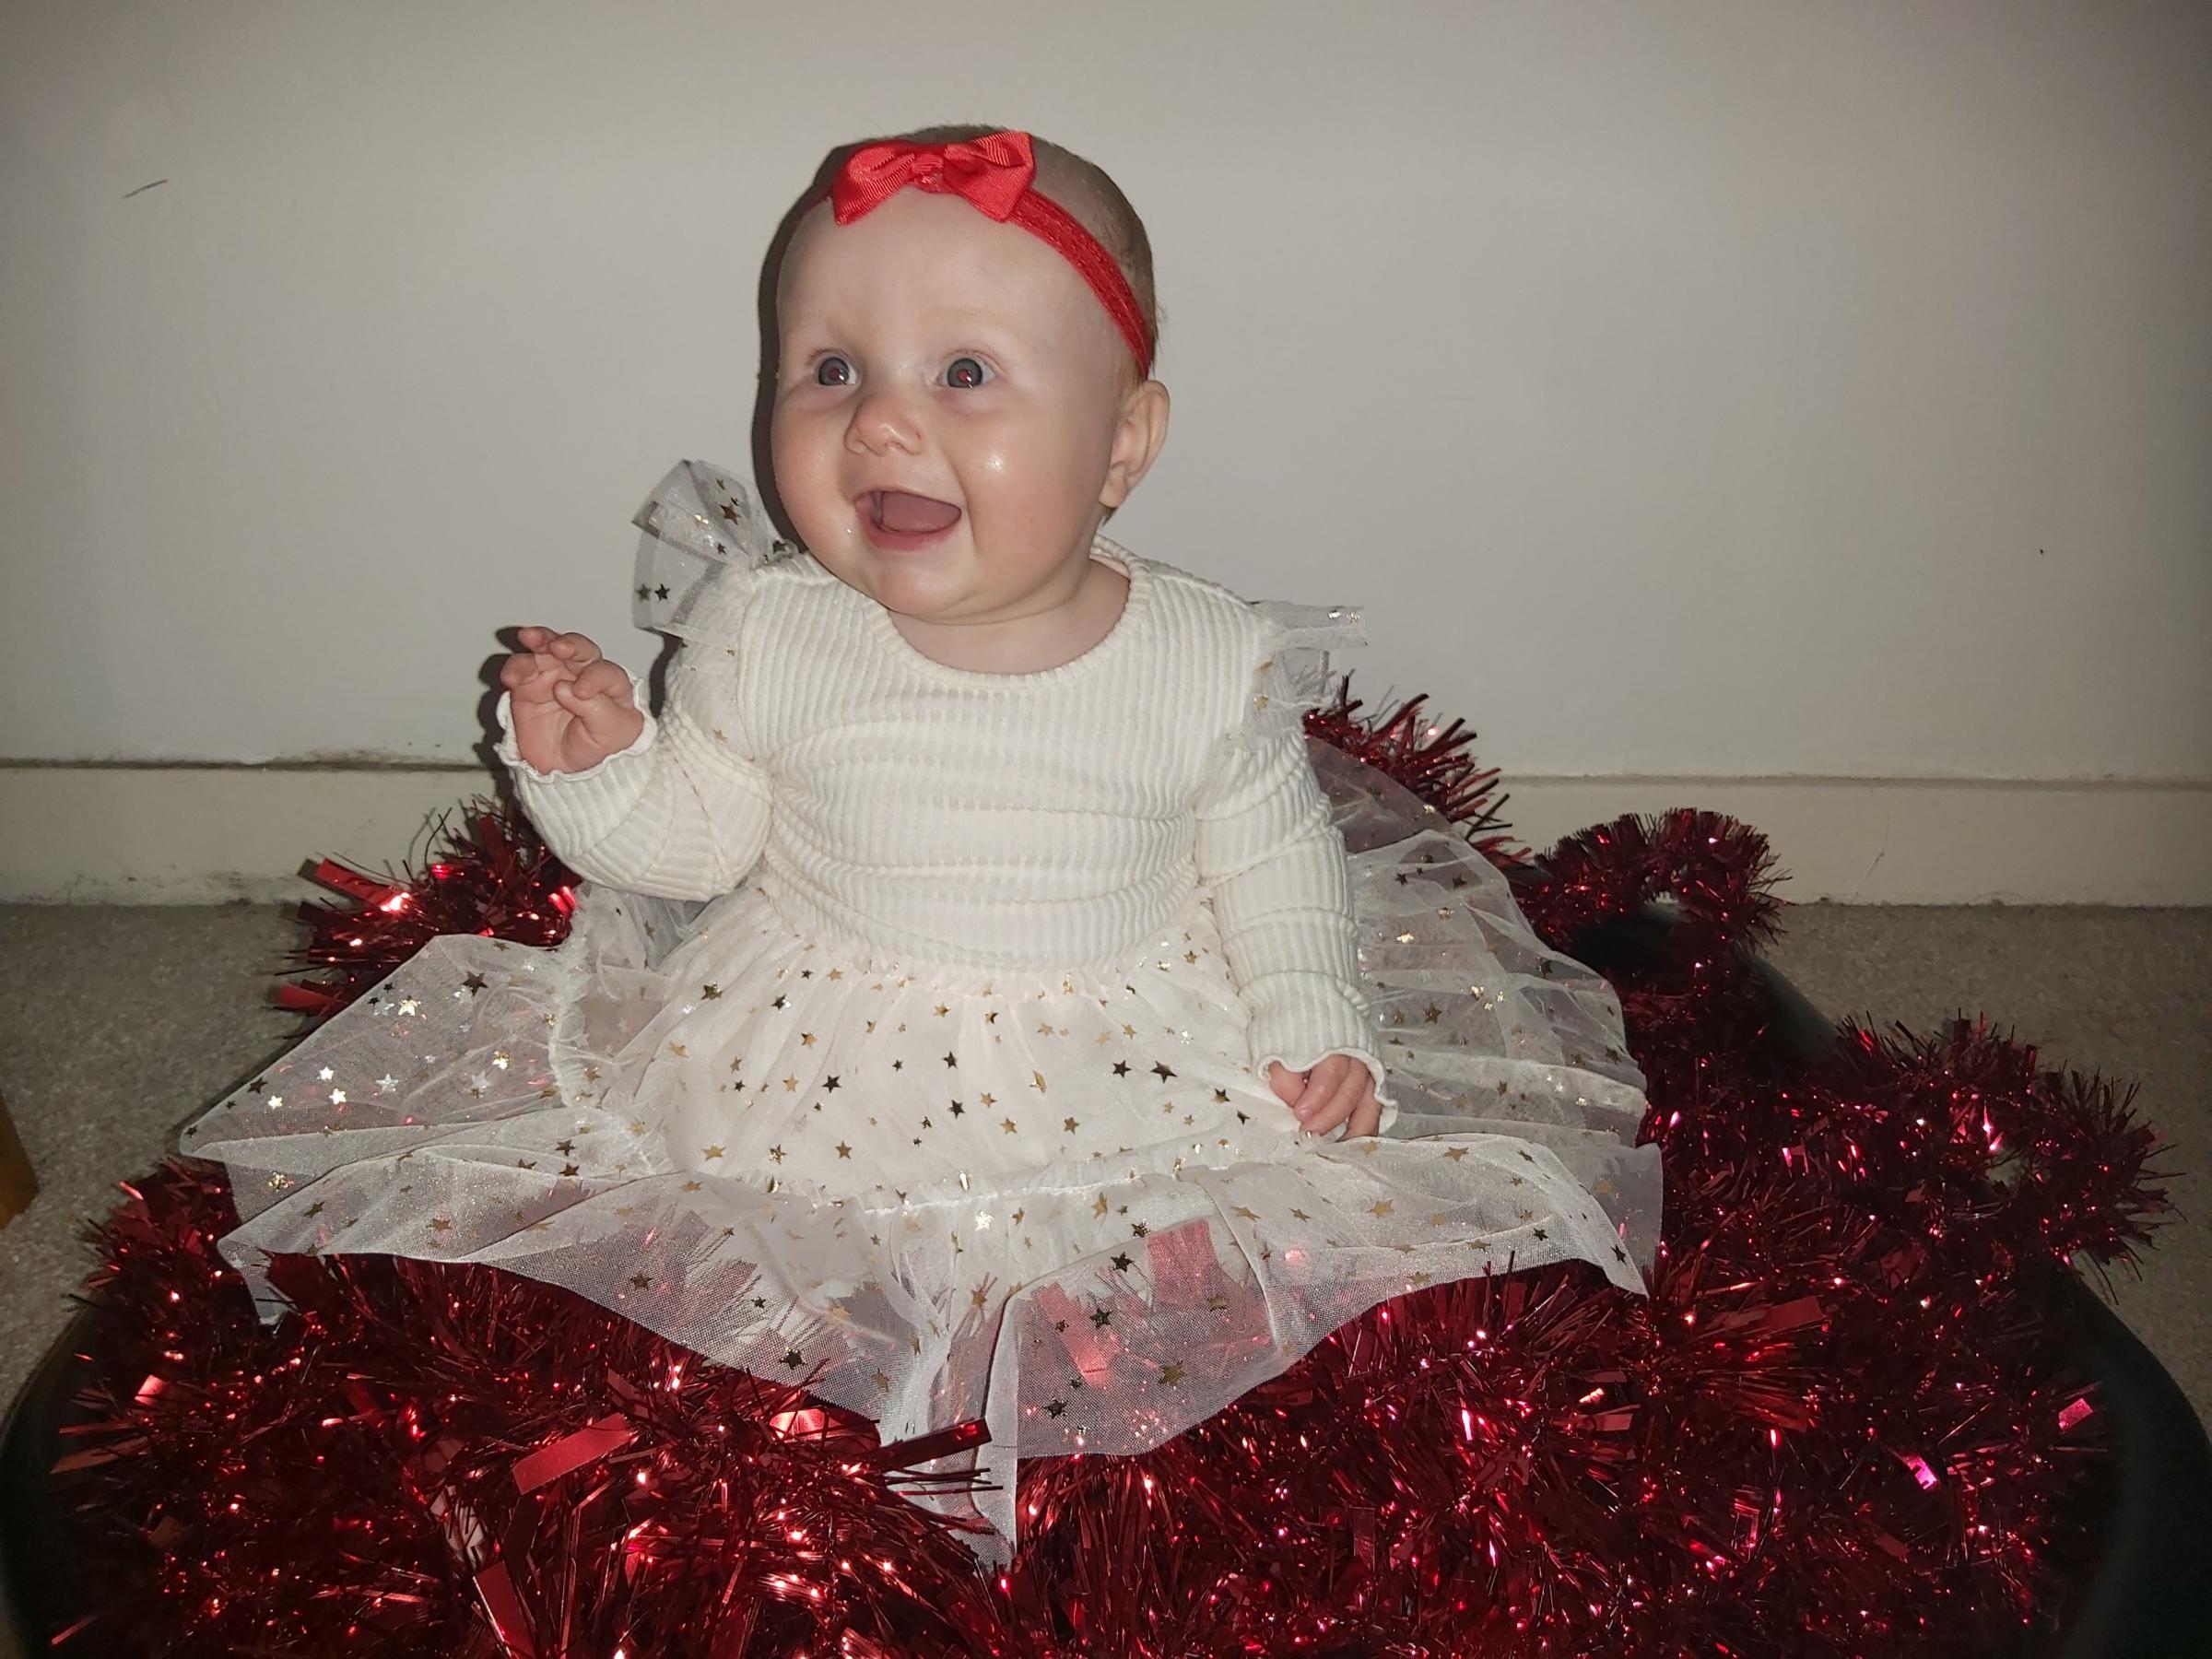 Chelsea Taylor, from Buckley: Eight-month-old Aria Taylor having fun playing with tinsel in her sparkly party dress.